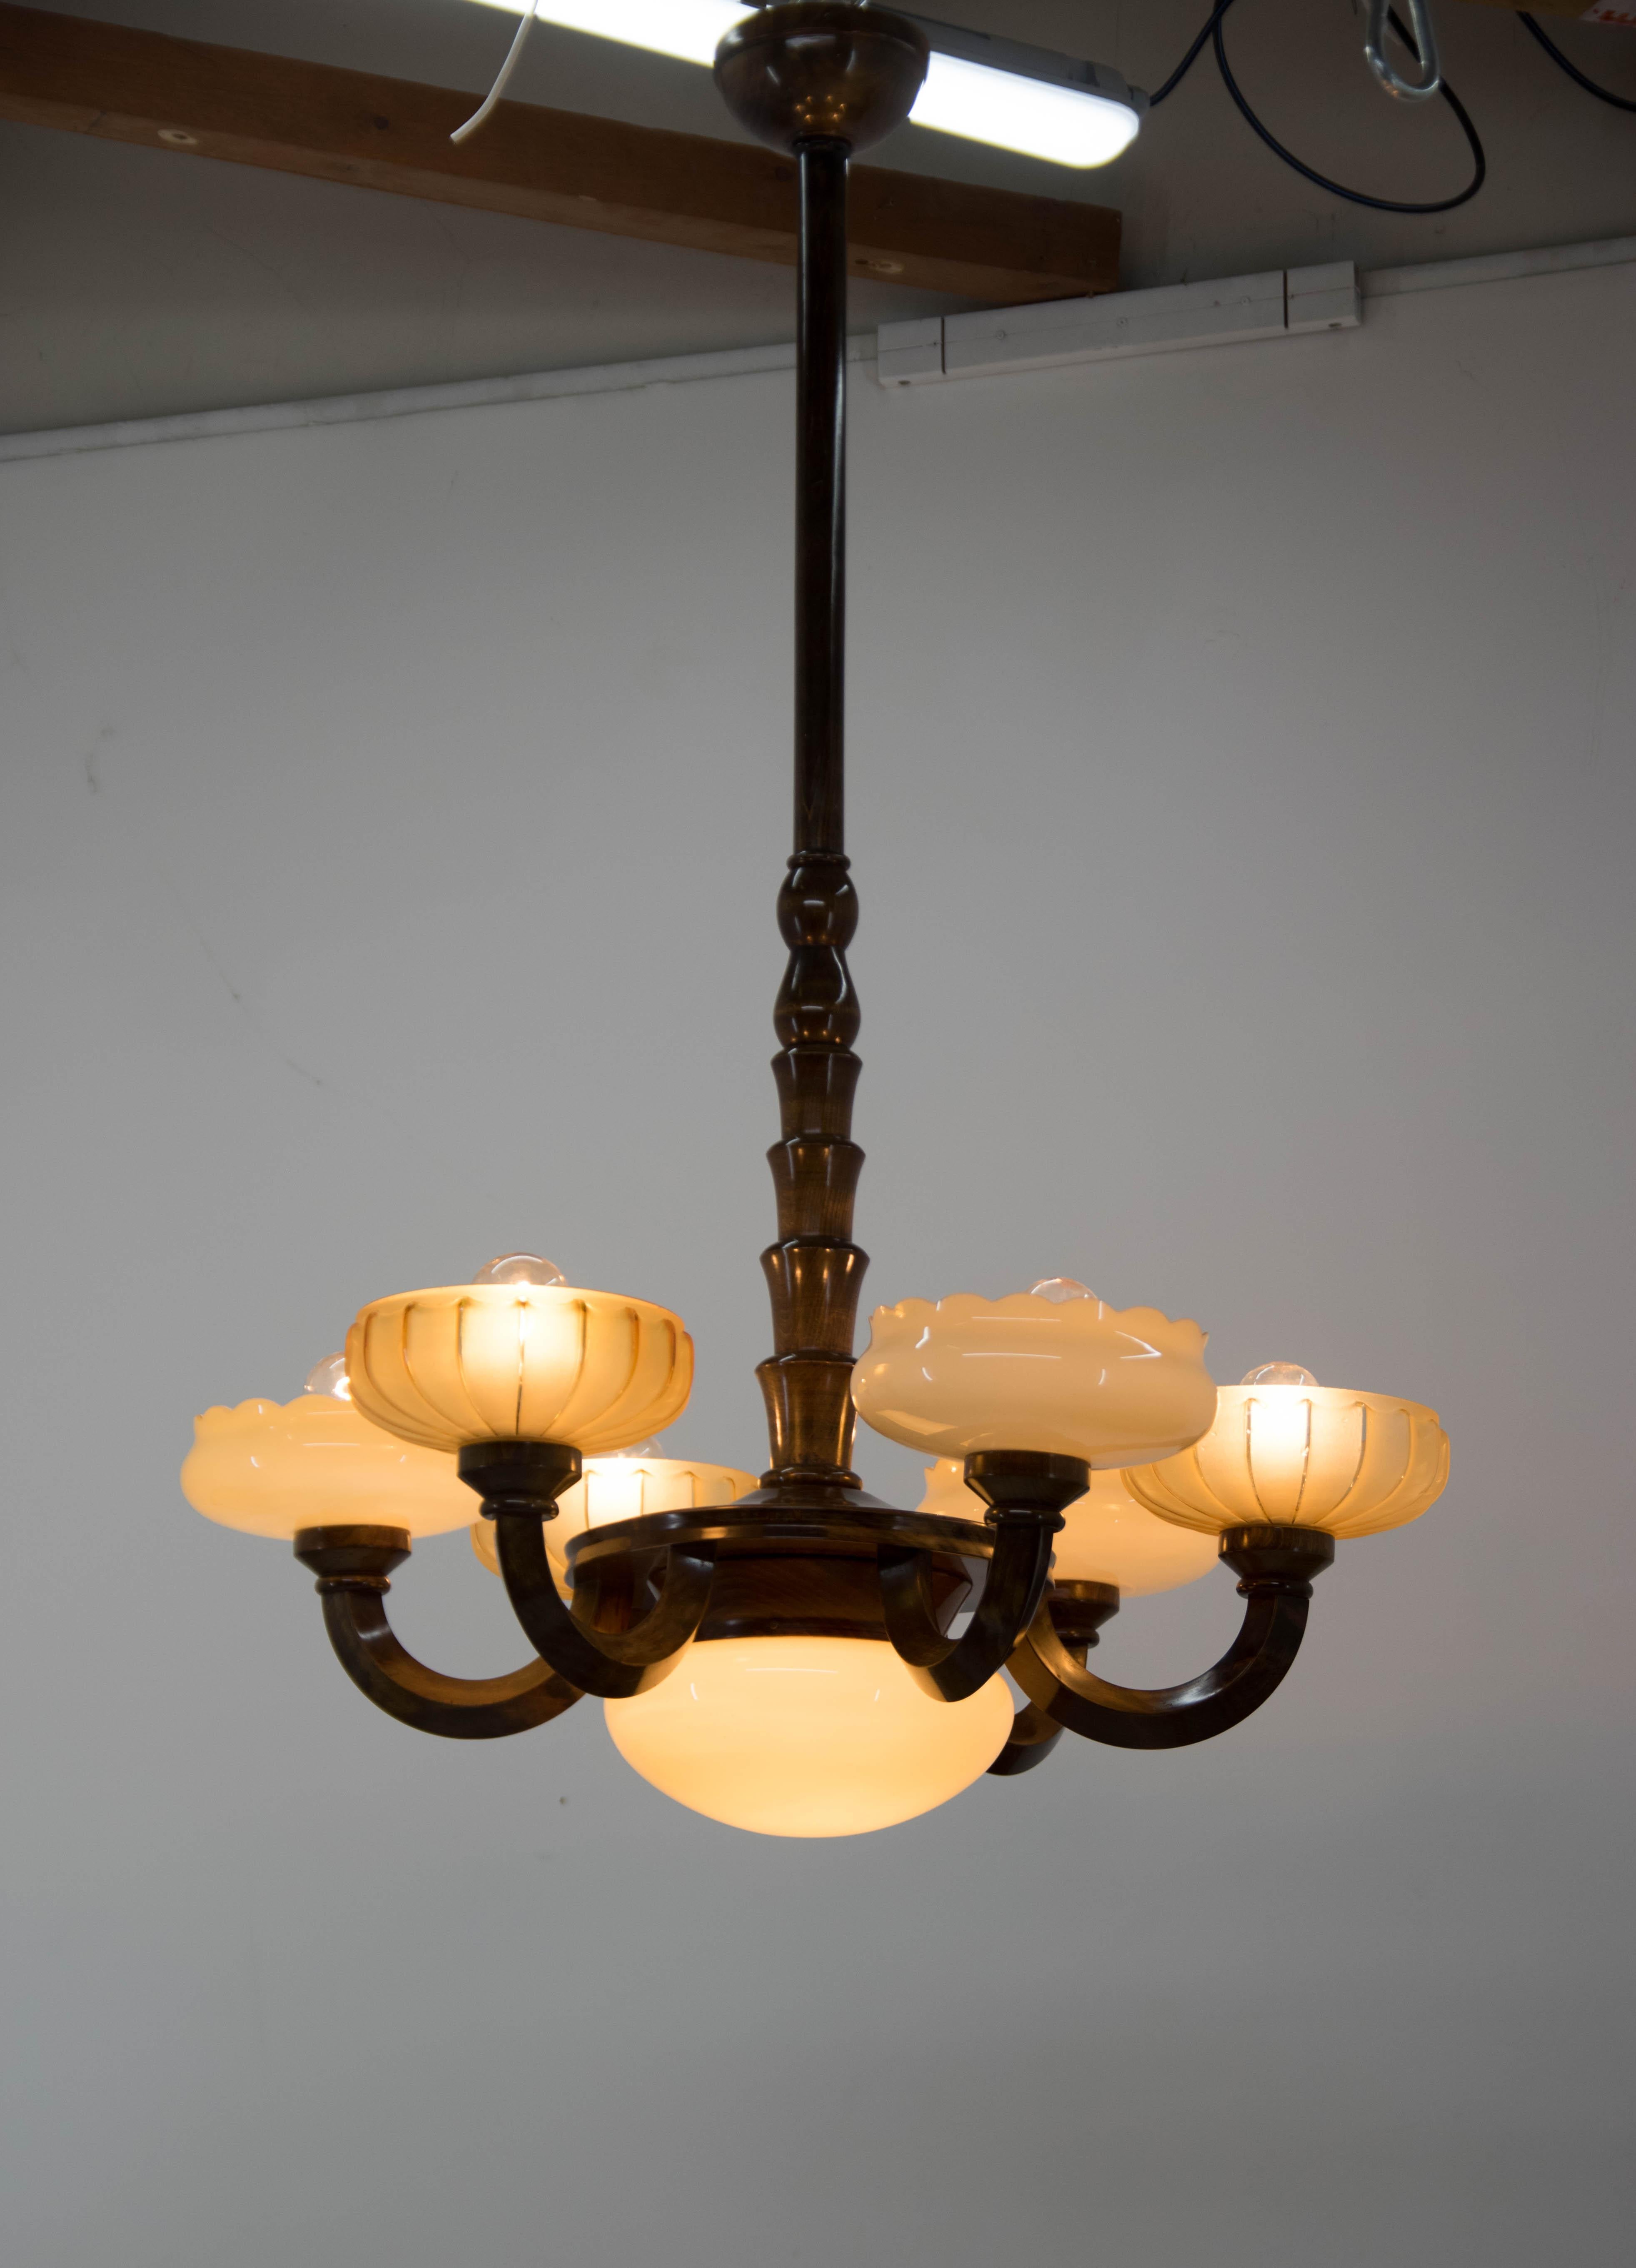 Representative Big Art Deco chandelier made of lacquered wood.
Very good original condition
Original glass shades.
Rewired: two separate circuits - 6+1 40W, E25-E27 bulbs
US wiring compatible.

